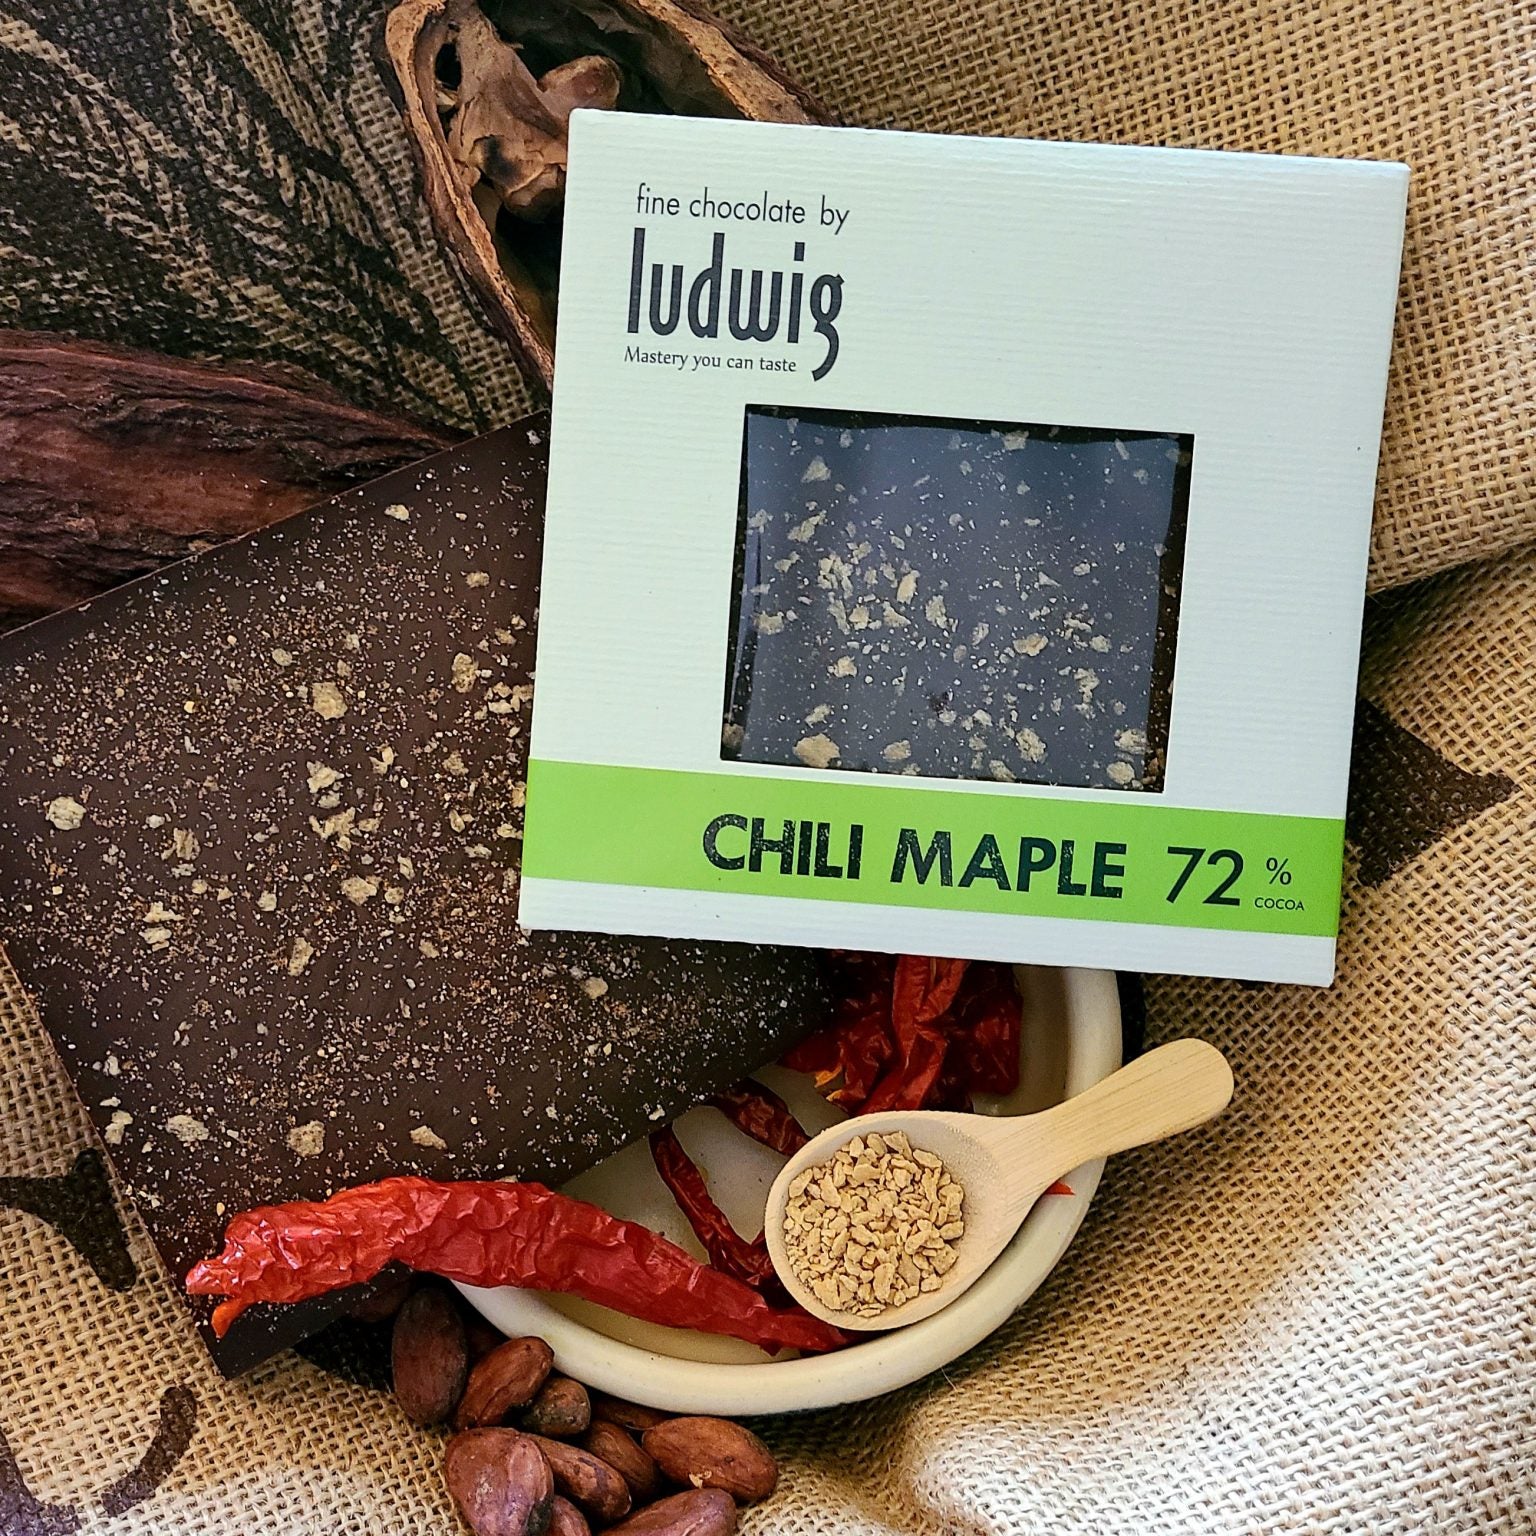 72% dark Chili & Maple (fine chocolate by Ludwig)-Product of Ontario Canada